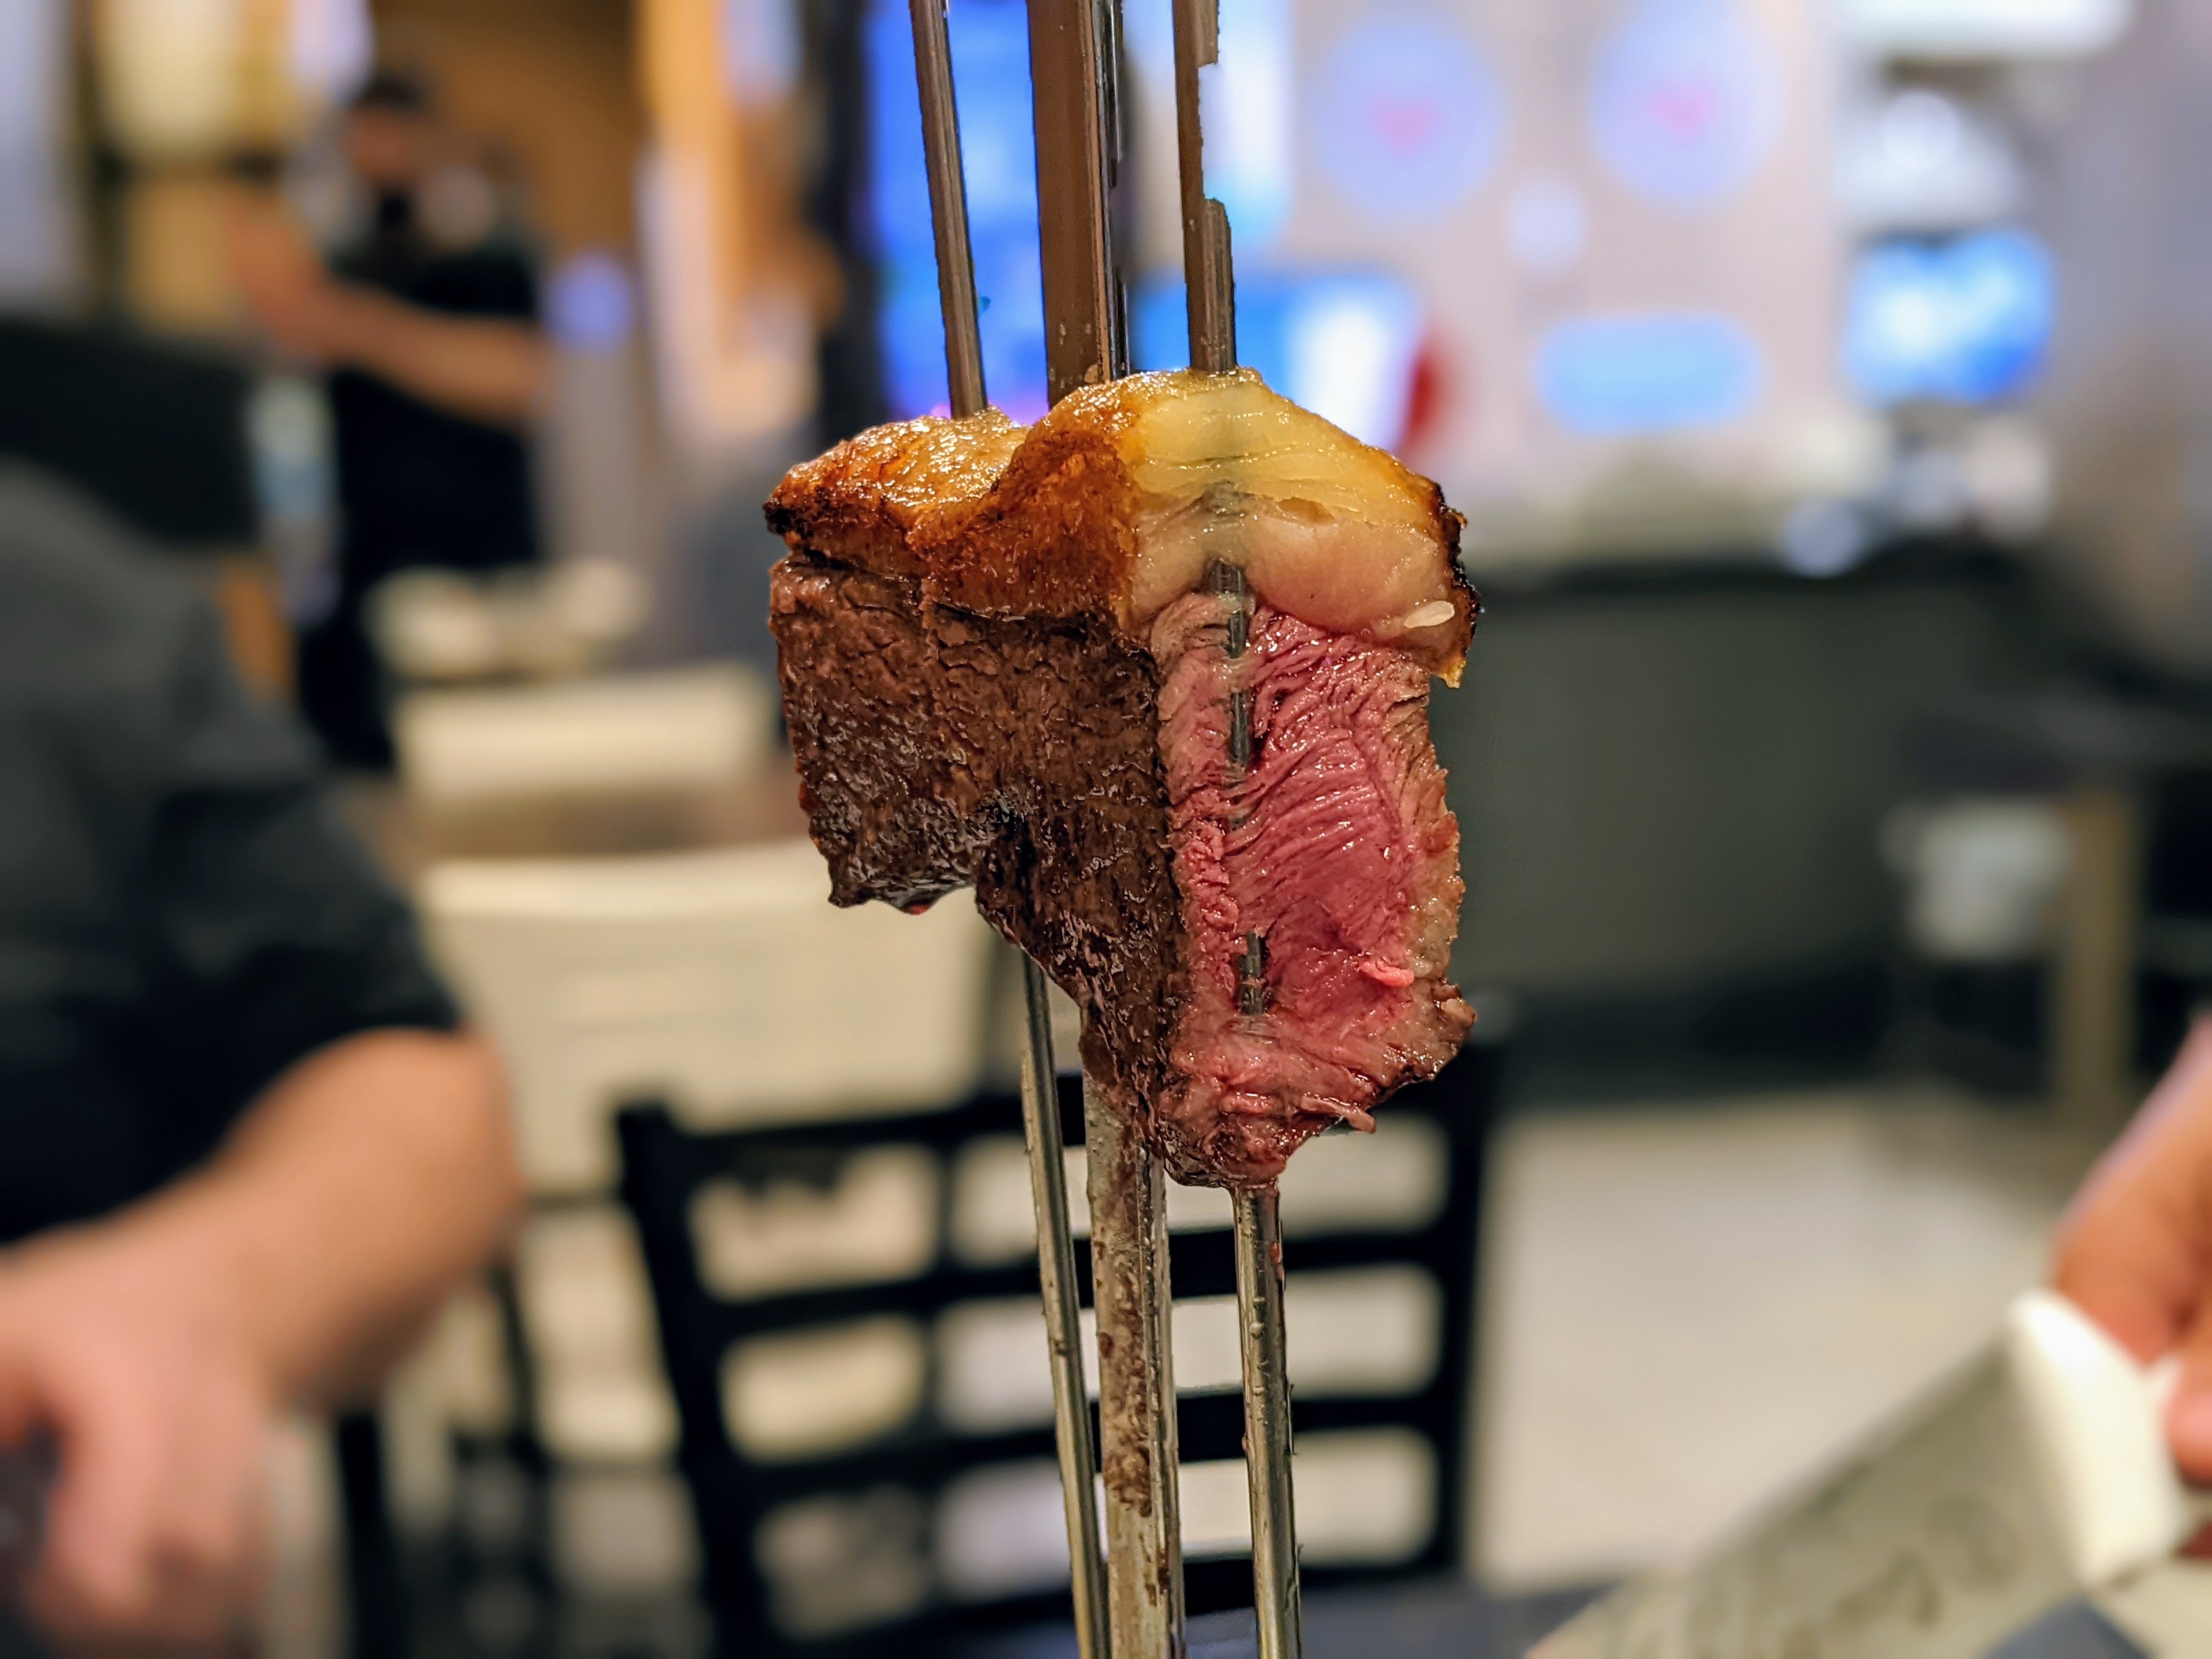 A cut of steak on a skewer with the fat cap still attached.